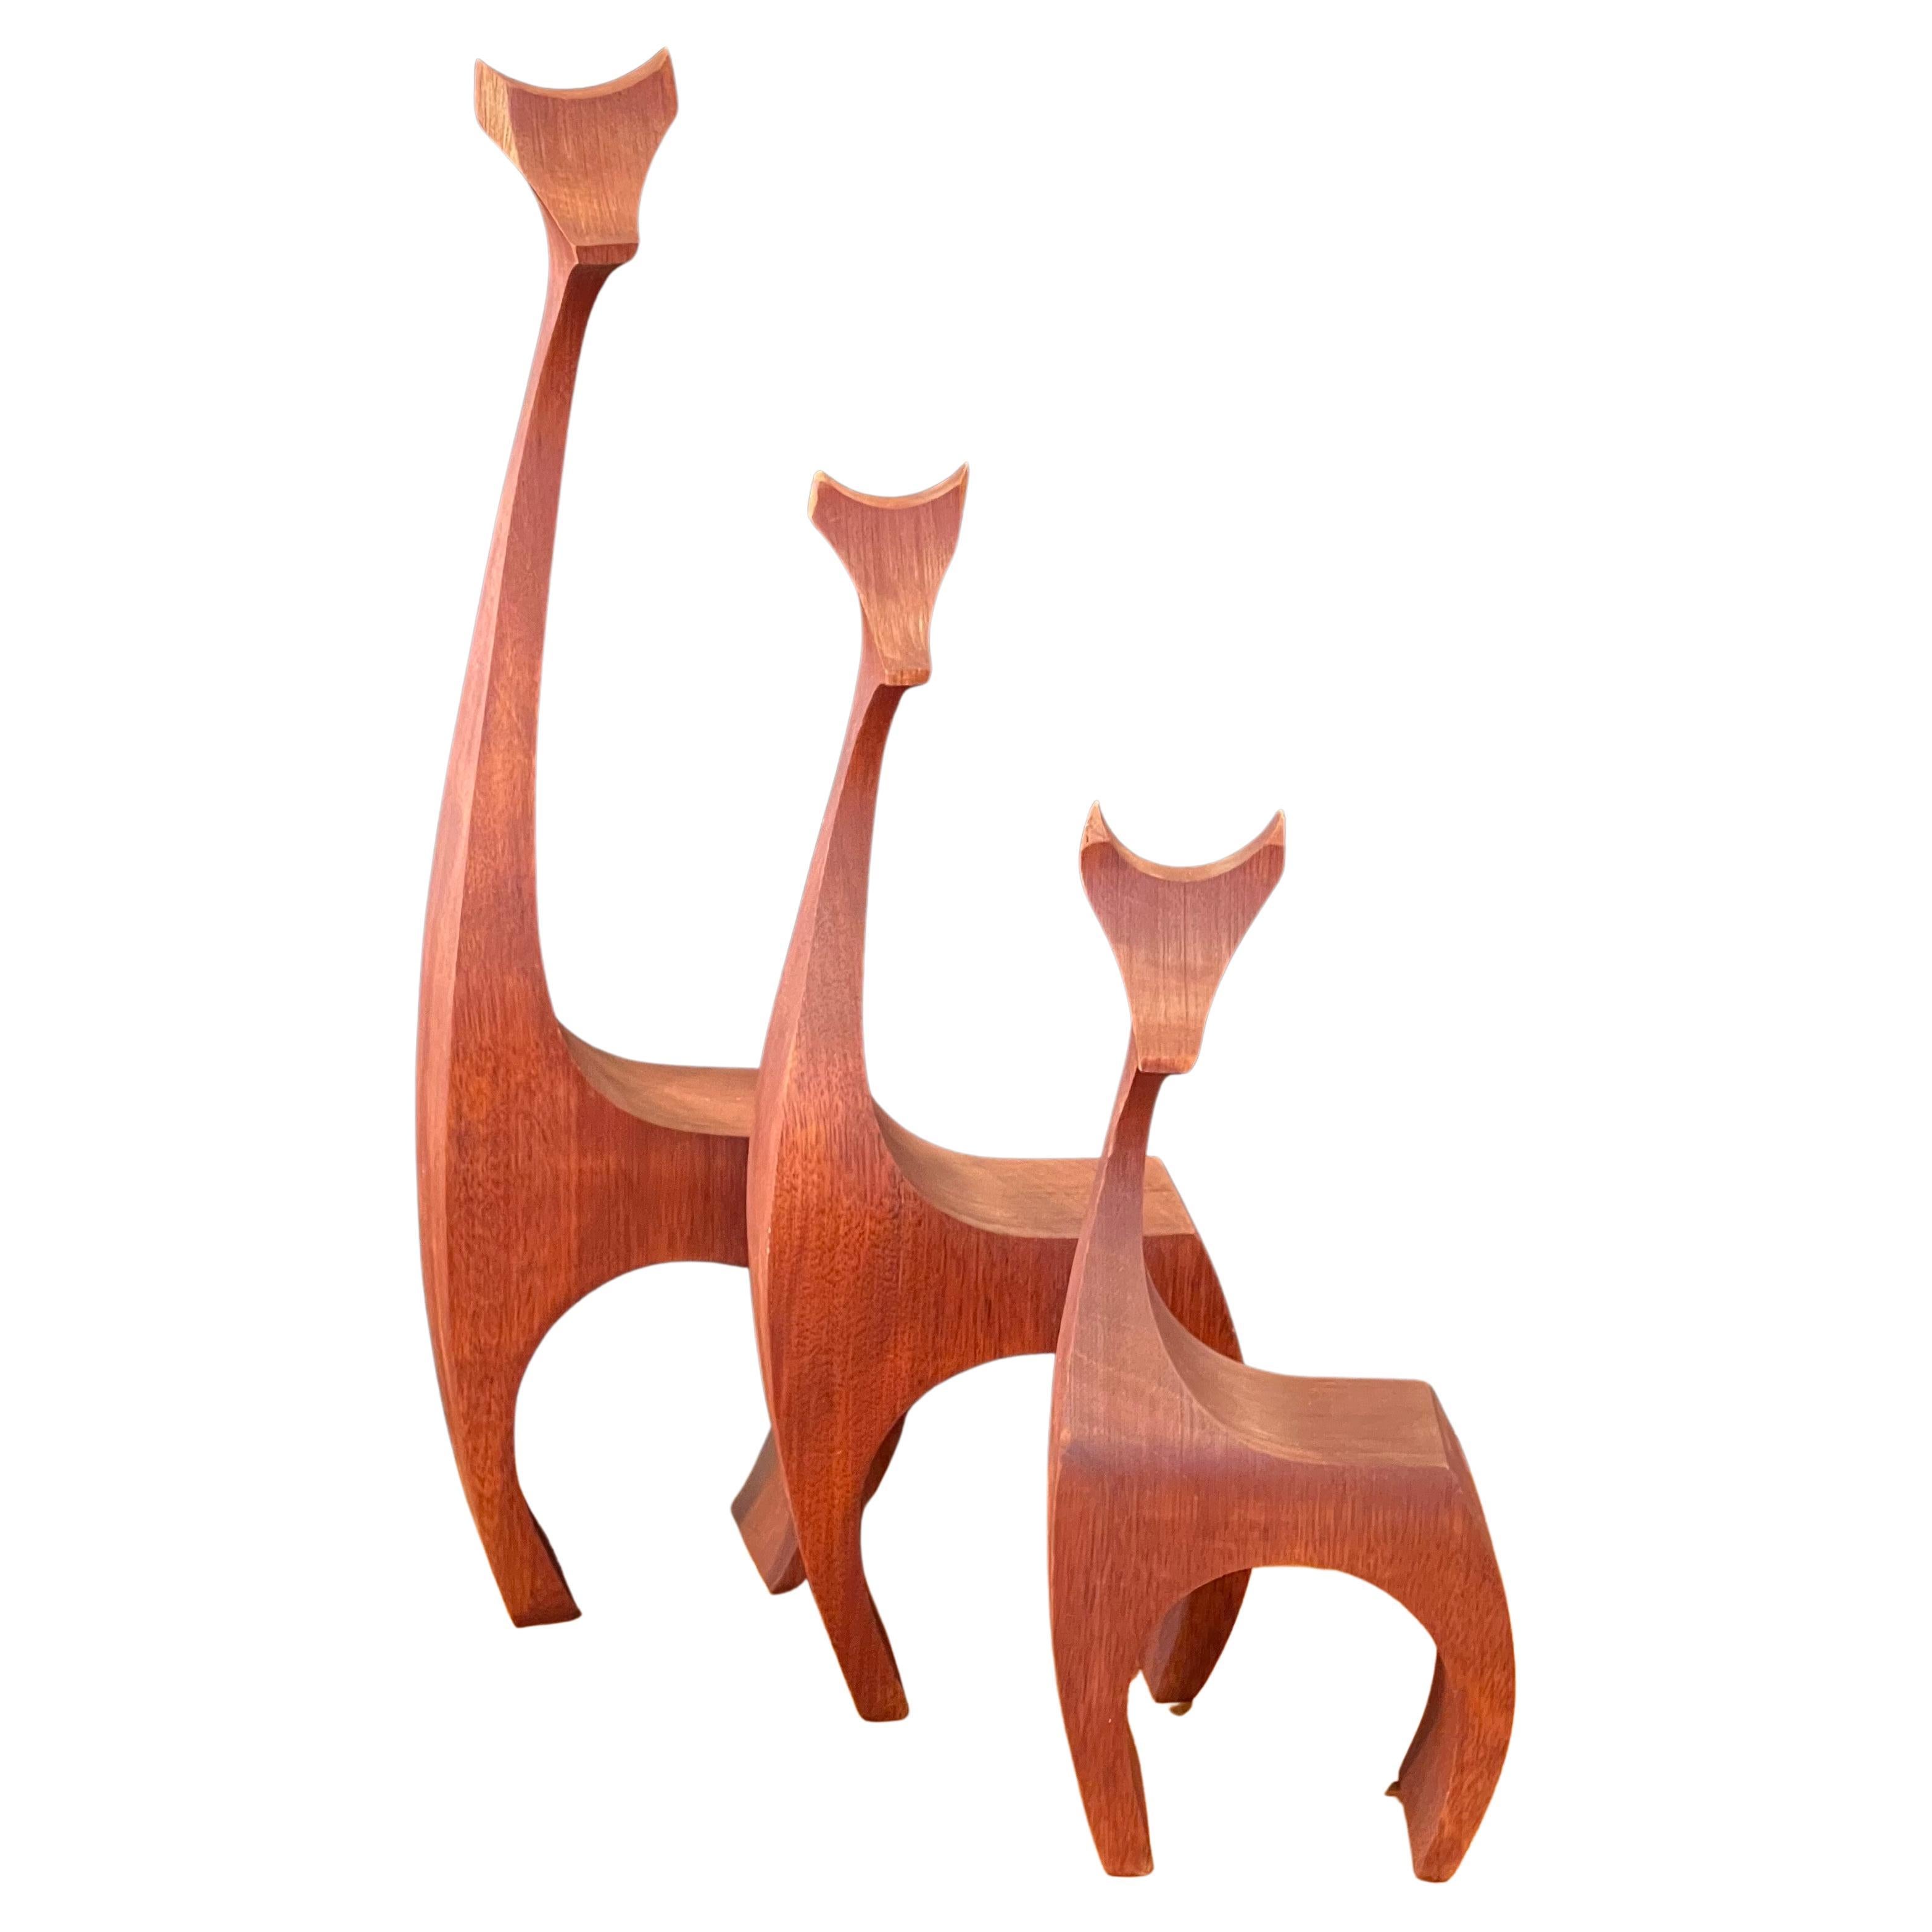 A super cool set of three modernist giraffe sculptures by Del Zotto Studios of Denver, CO, circa 1980s. The pieces are hand-carved from what I believe to be teak wood and measure: 4.5